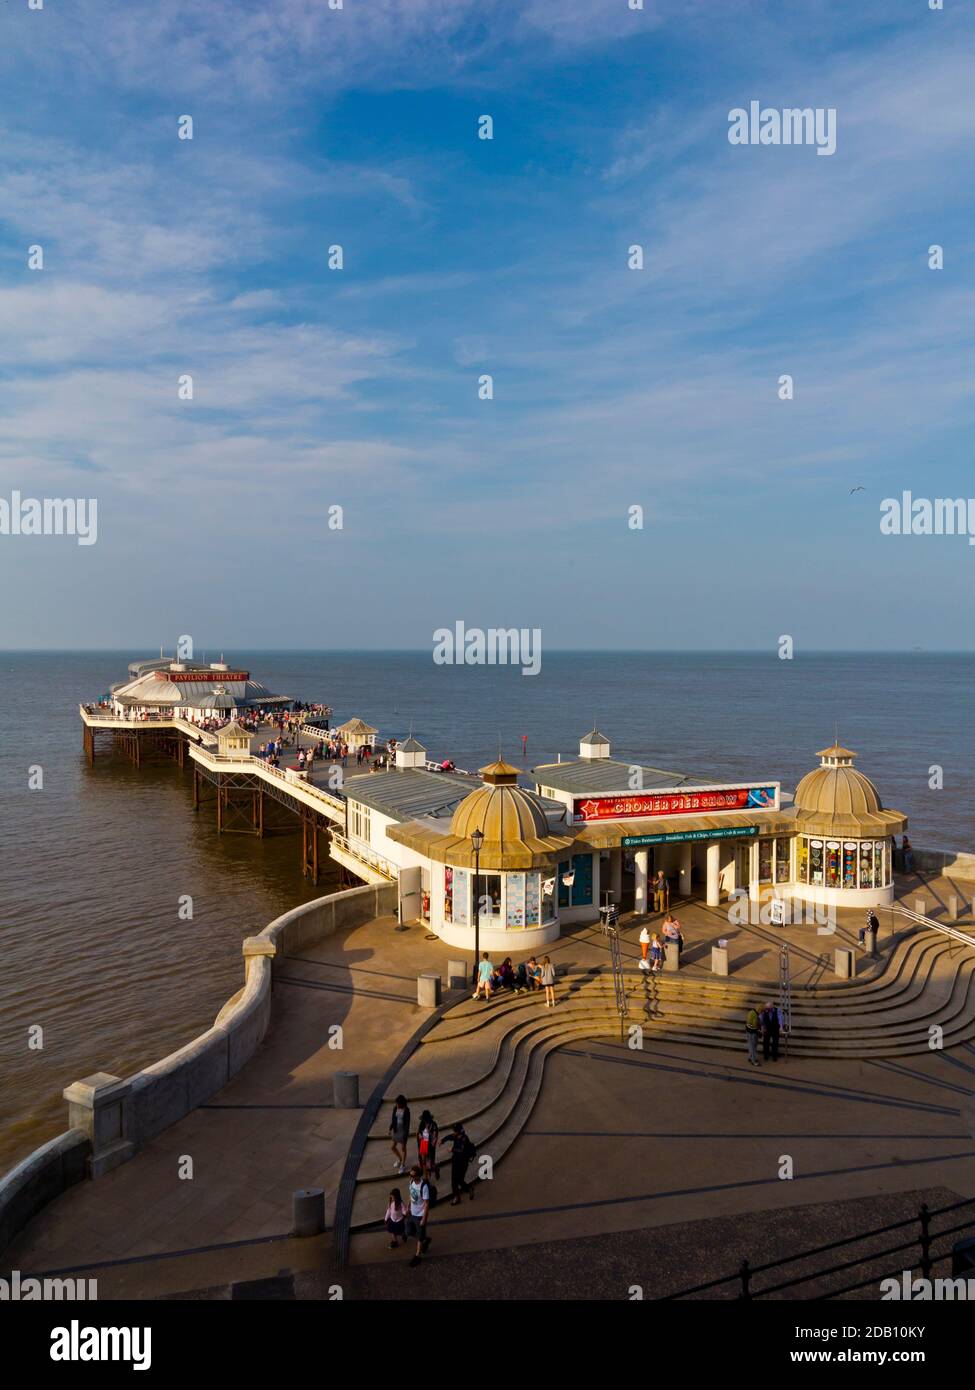 Cromer Pier in north Norfolk England UK  a grade 2 listed pier which houses the Pavilion Theatre and Cromer lifeboat station. Stock Photo